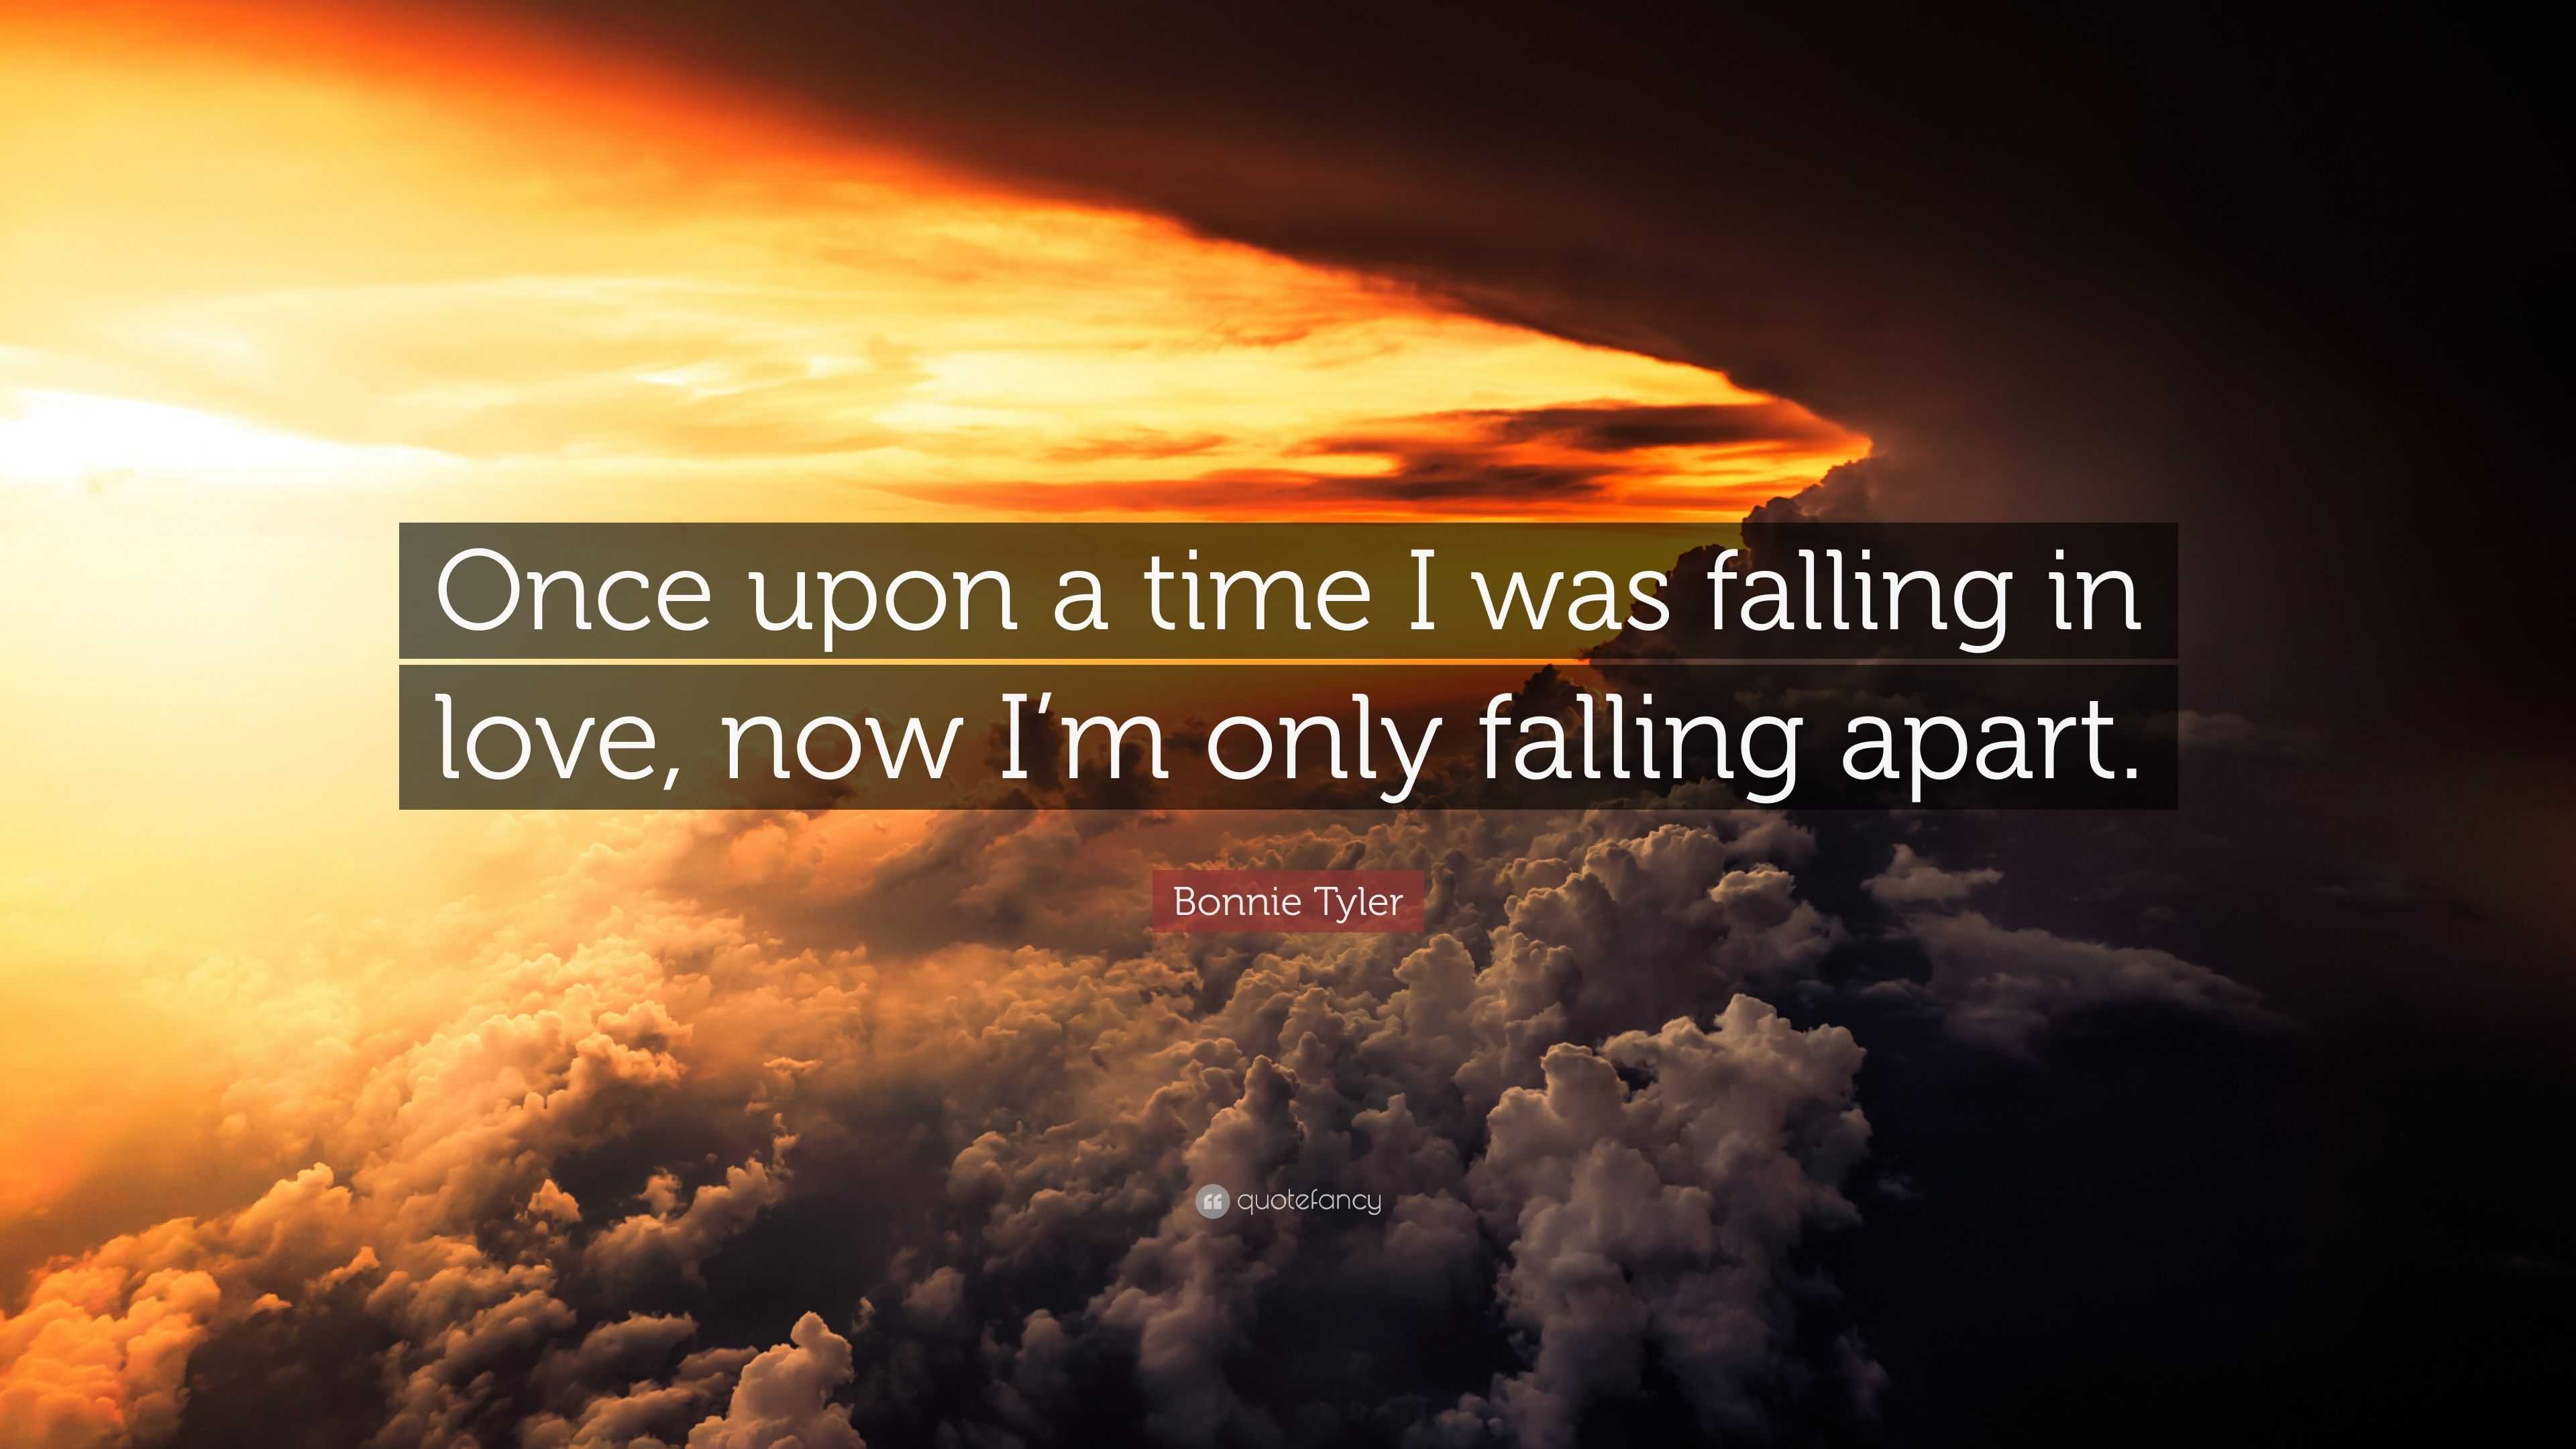 Bonnie Tyler Quote “ ce upon a time I was falling in love now